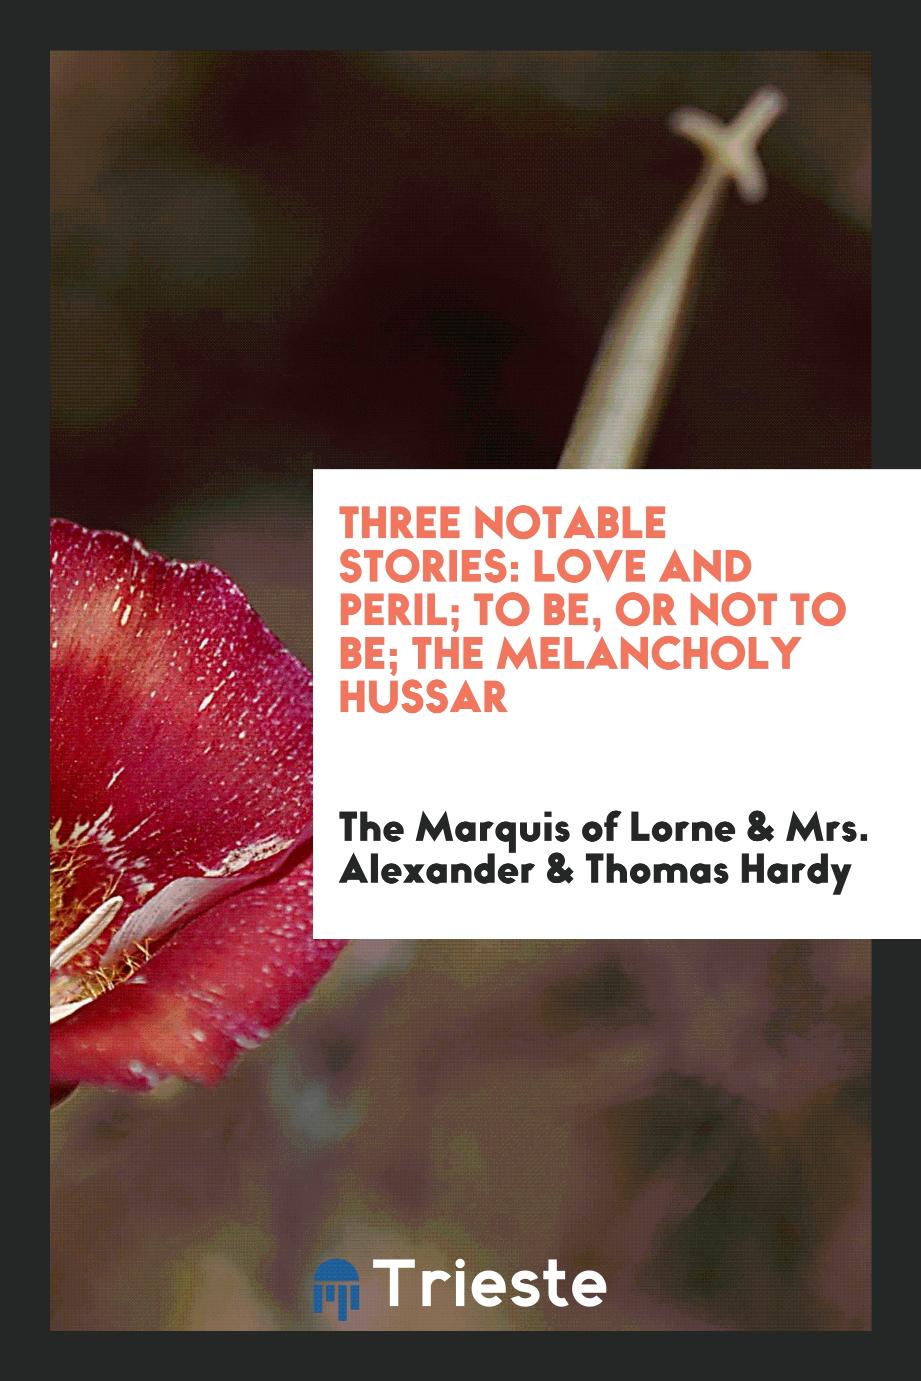 Three notable stories: Love and peril; To be, or not to be; The melancholy Hussar